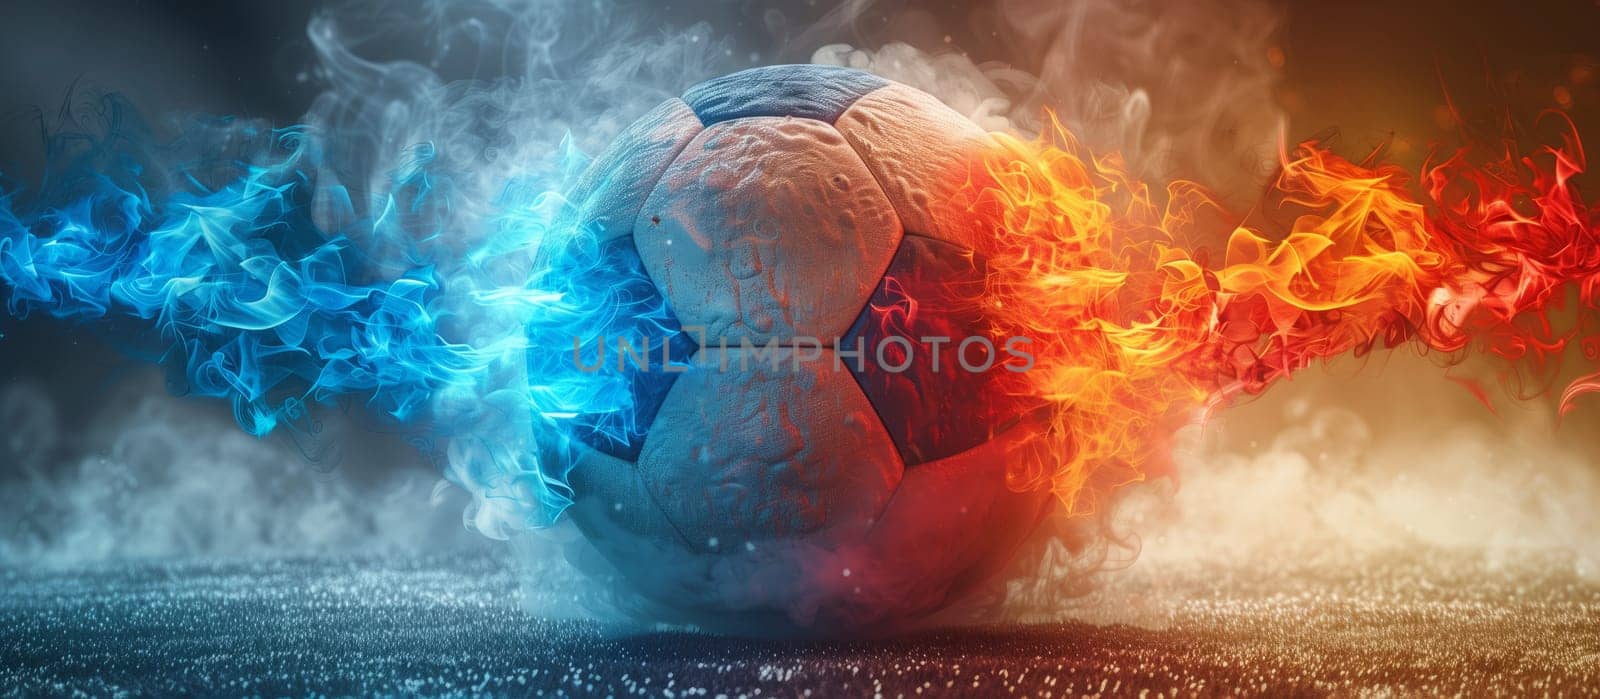 The soccer ball is engulfed in flames and smoke against a backdrop of electric blue skies and swirling clouds. It creates a mesmerizing and dramatic artistic scene